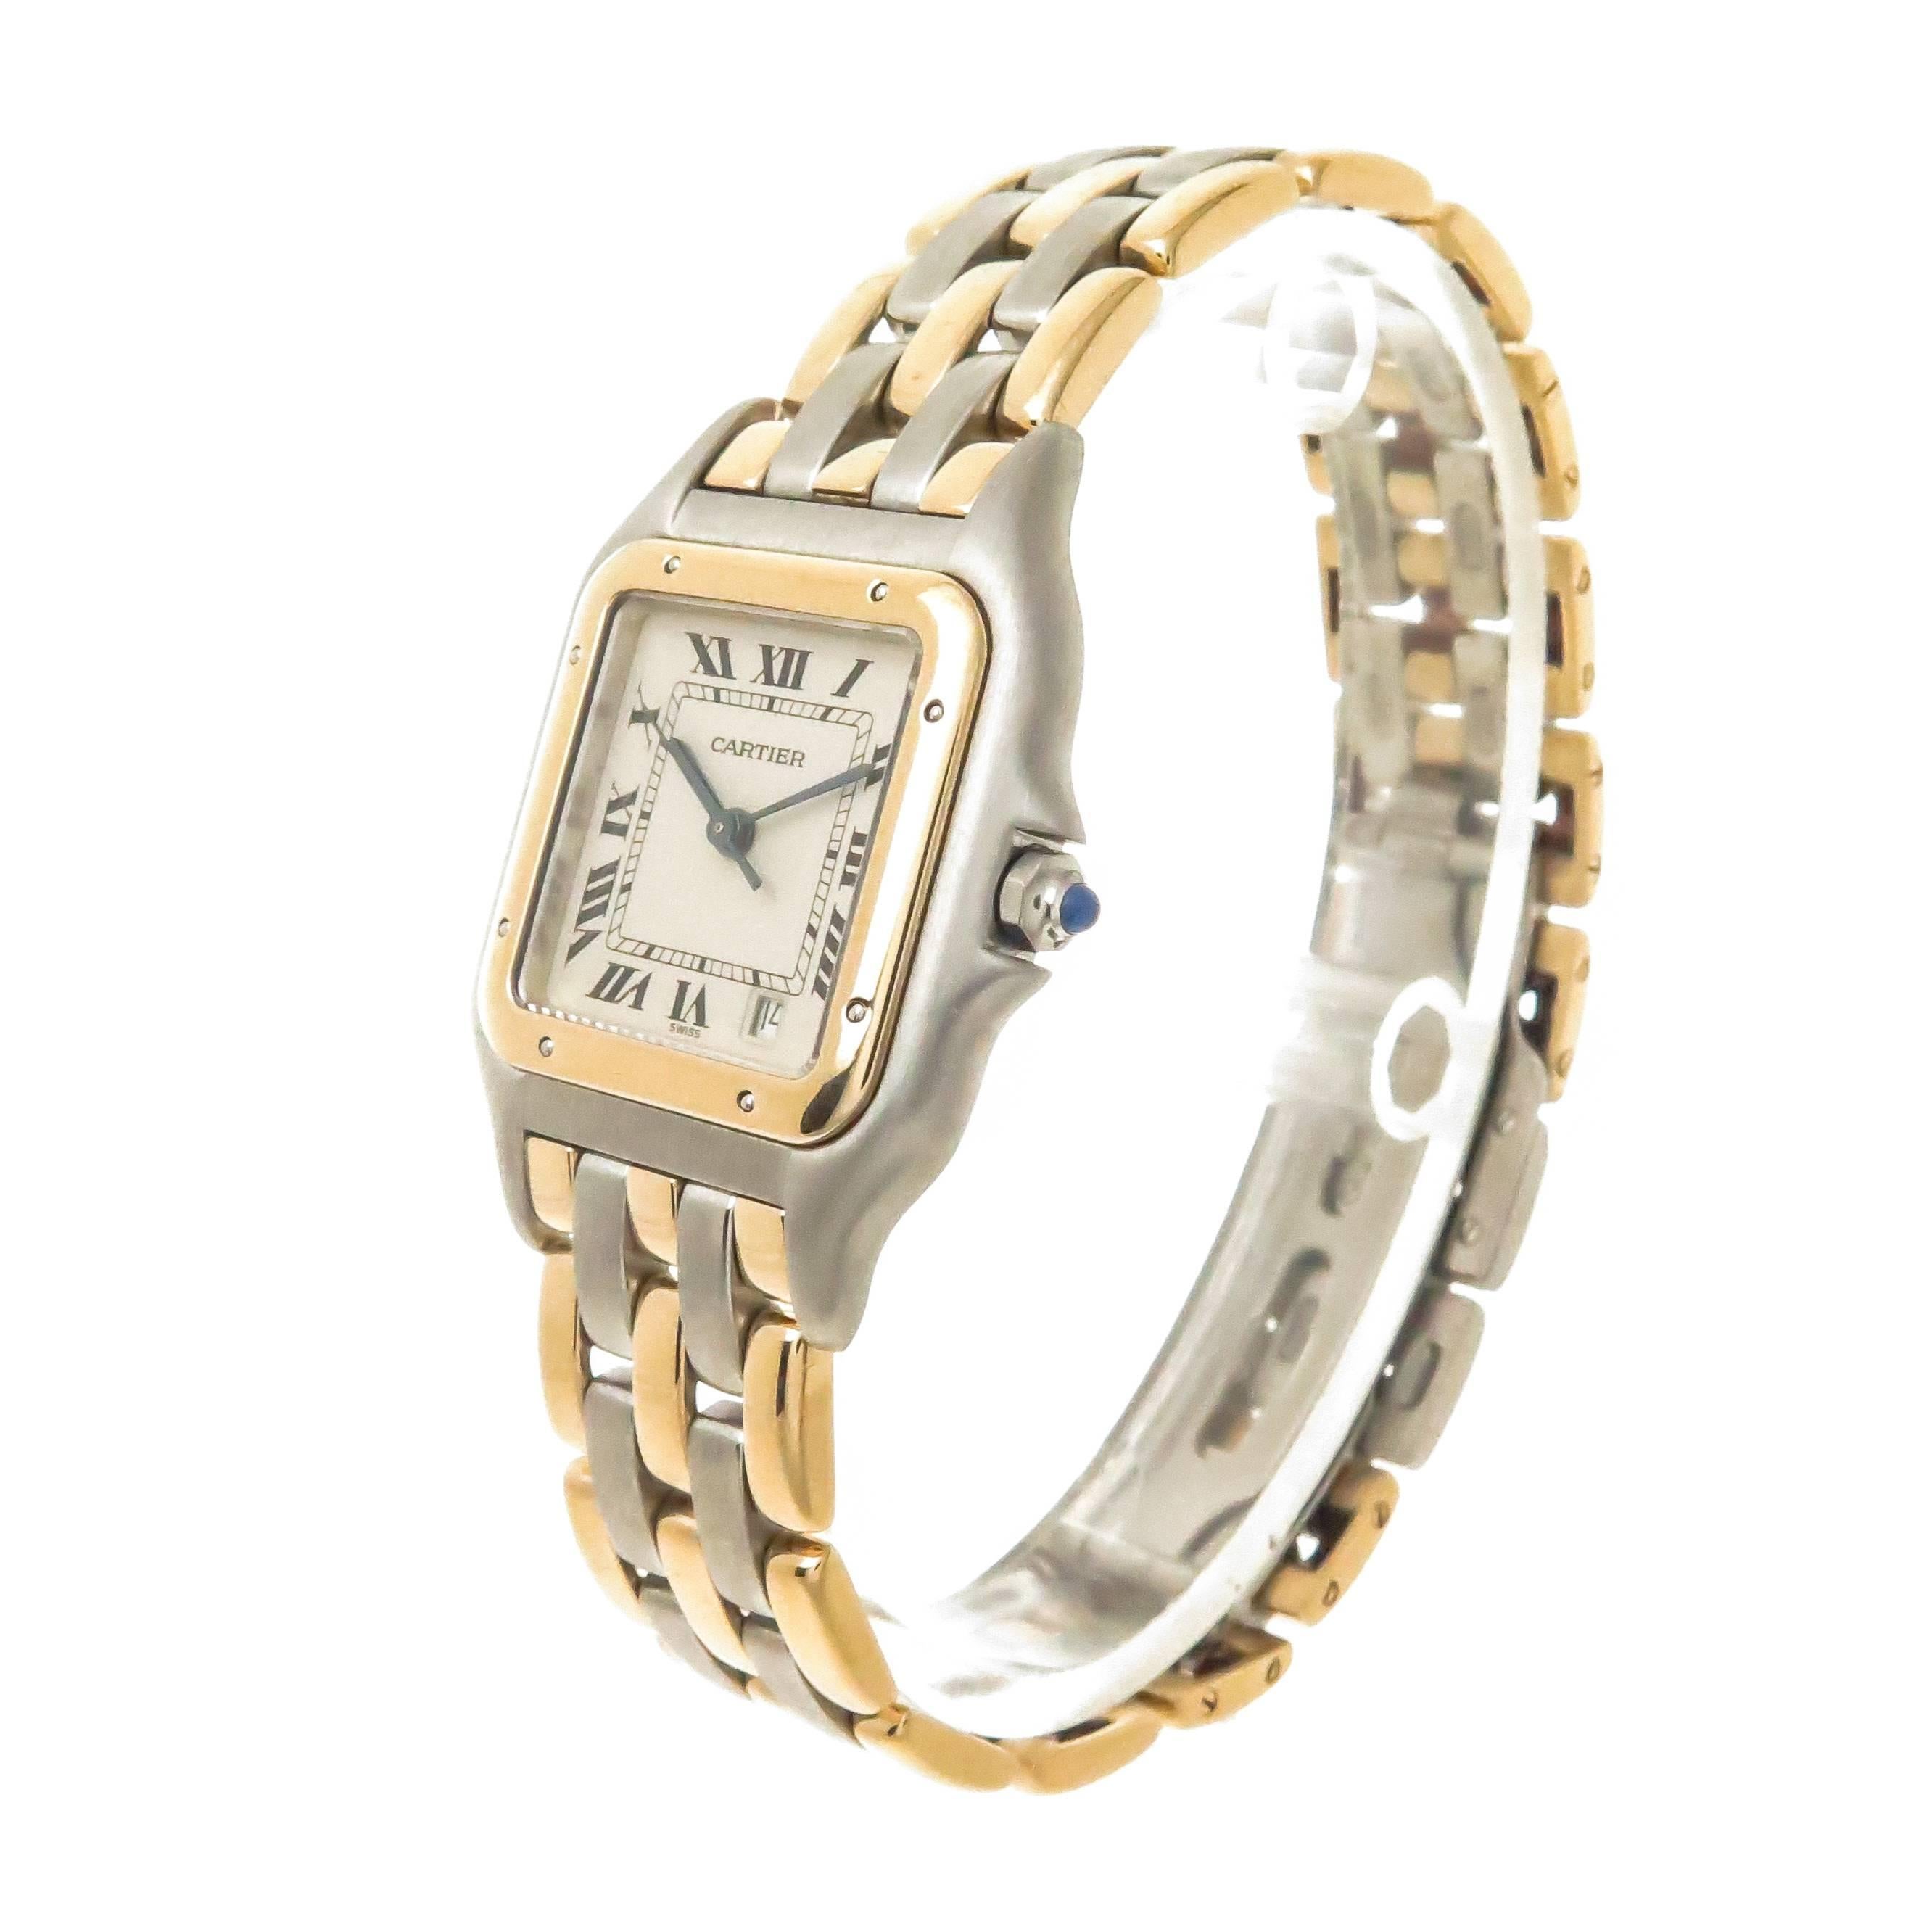 Circa 2000 Cartier Panther Collection Mid size Wrist Watch, 36 X 26 MM Stainless Steel Water resistant Case with 18K Yellow Gold Bezel, Quartz Movement, White Dial with Black Roman Numerals a Calendar window at the 5 position and a sapphire Crown.